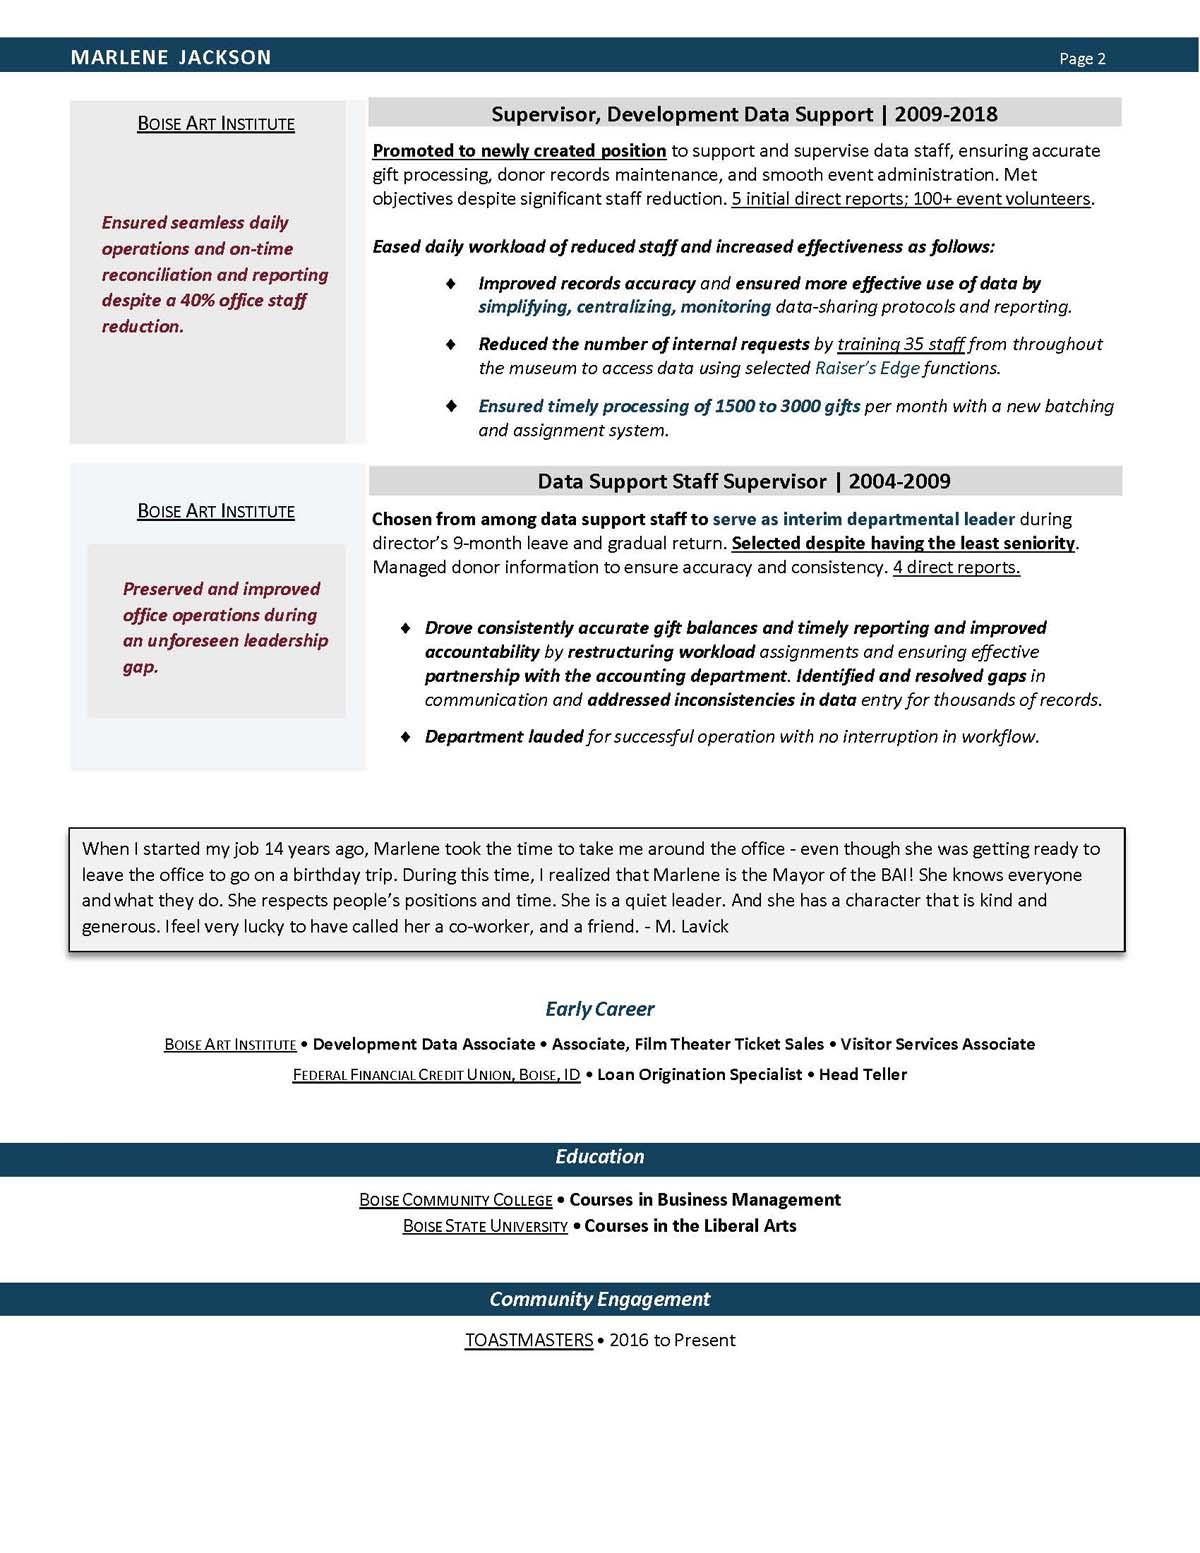 Sample resume: Nonprofit Sector, High Experience, Combination